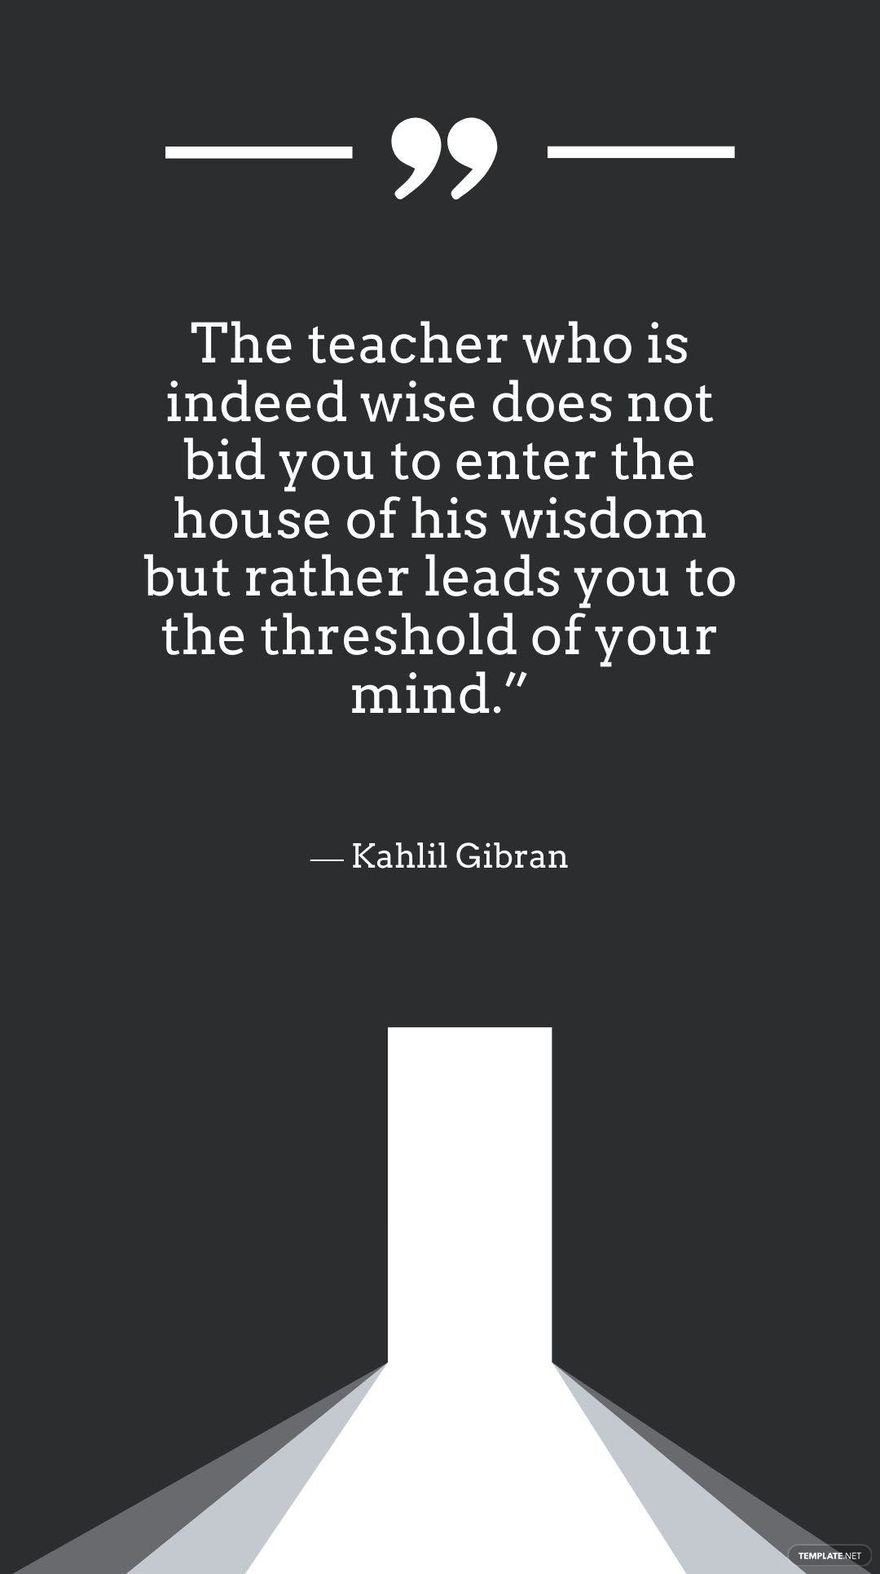 Free Kahlil Gibran - The teacher who is indeed wise does not bid you to enter the house of his wisdom but rather leads you to the threshold of your mind. in JPG